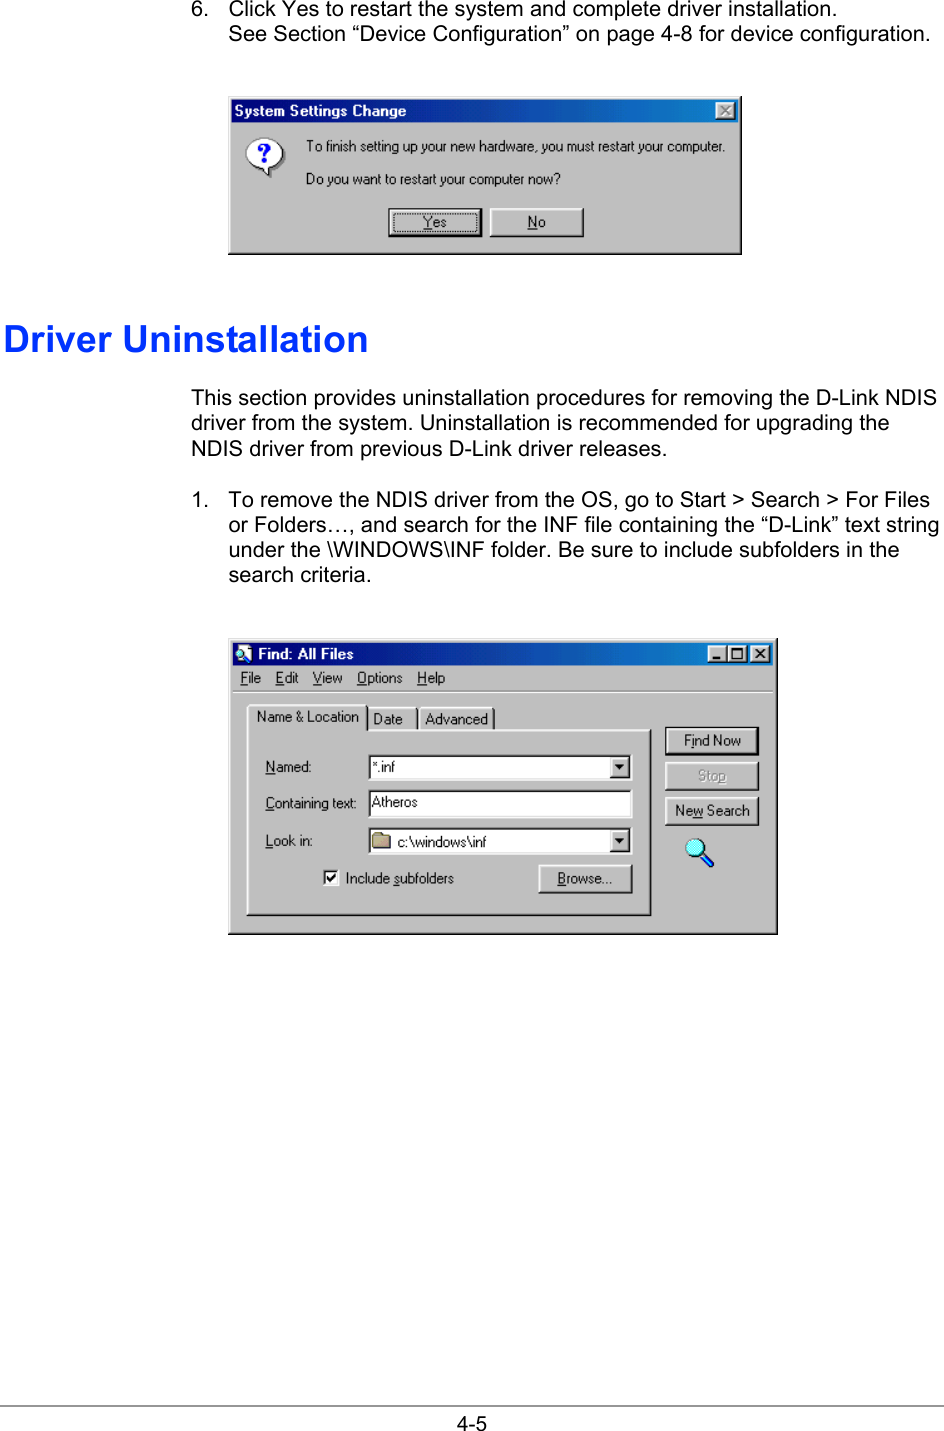  4-5 6.  Click Yes to restart the system and complete driver installation. See Section “Device Configuration” on page 4-8 for device configuration.   Driver Uninstallation This section provides uninstallation procedures for removing the D-Link NDIS driver from the system. Uninstallation is recommended for upgrading the NDIS driver from previous D-Link driver releases. 1.  To remove the NDIS driver from the OS, go to Start &gt; Search &gt; For Files or Folders…, and search for the INF file containing the “D-Link” text string under the \WINDOWS\INF folder. Be sure to include subfolders in the search criteria.    